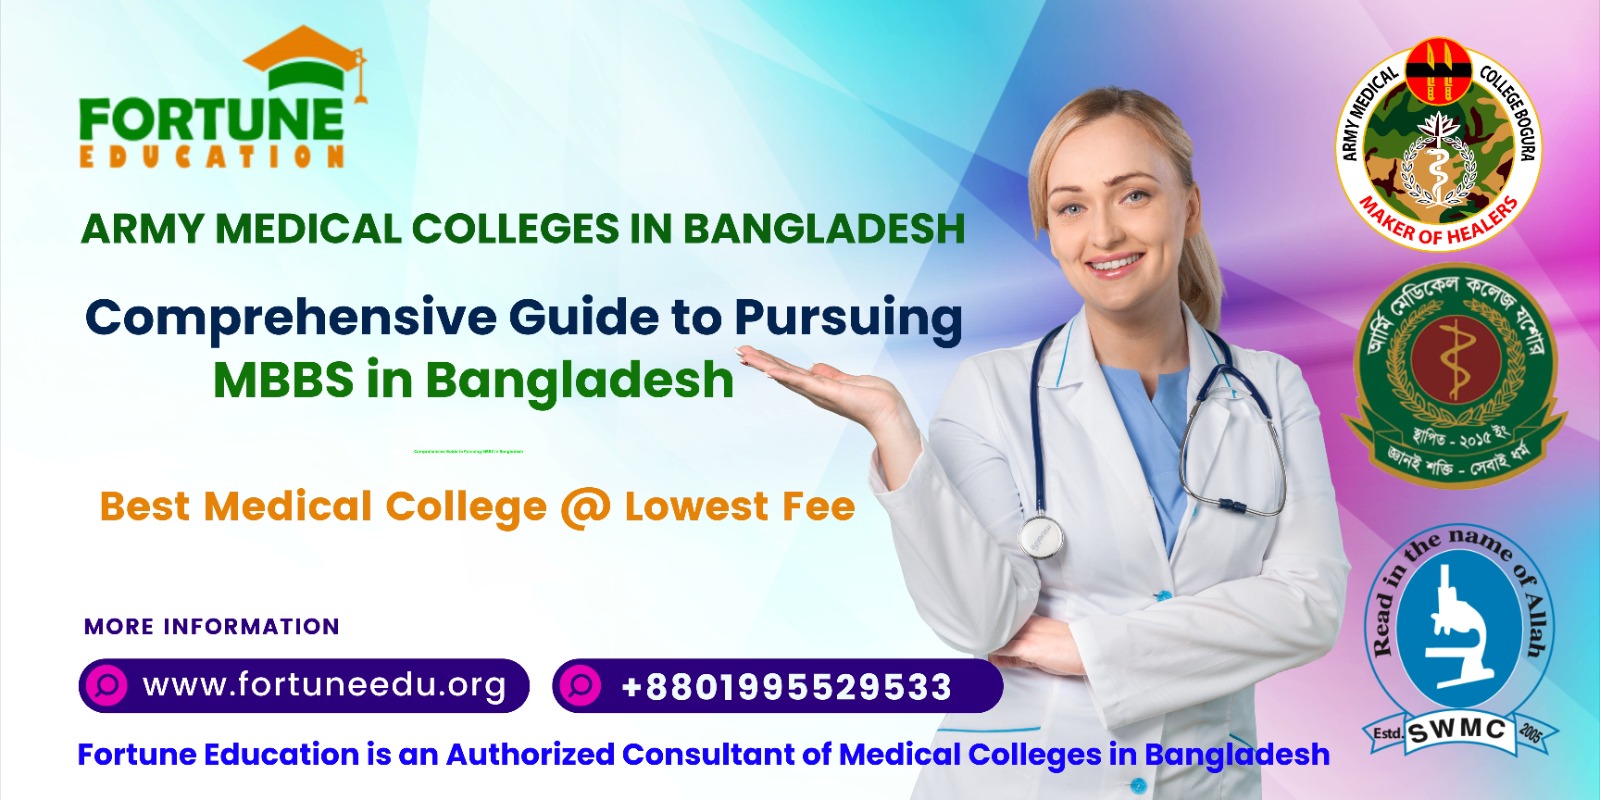 Quality of Education at Army Medical Colleges in Bangladesh